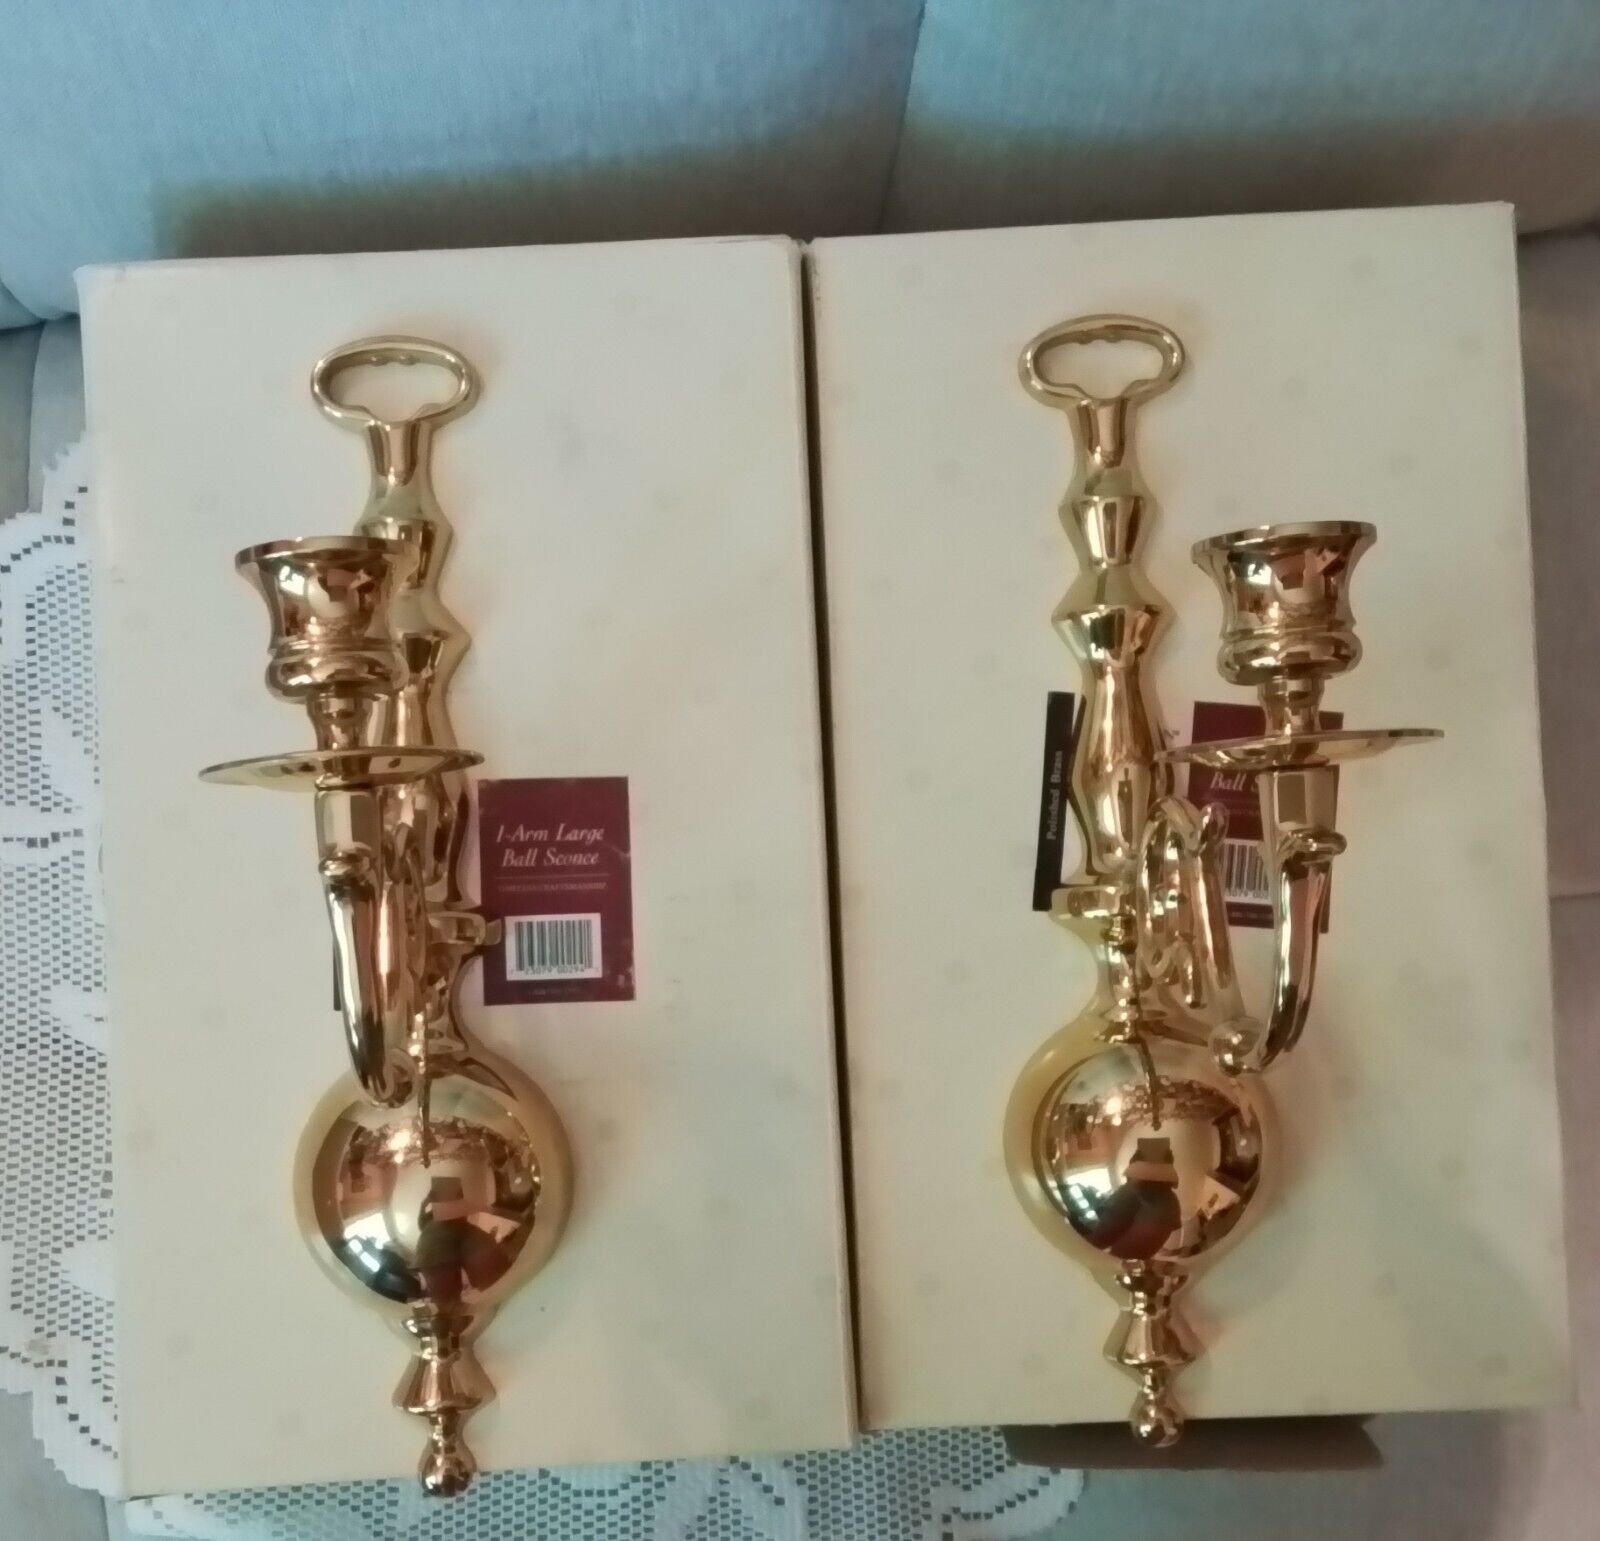 Vintage Baldwin Brass Candlestick Sconce Pair Large Arm Ball Sconce New Not Used